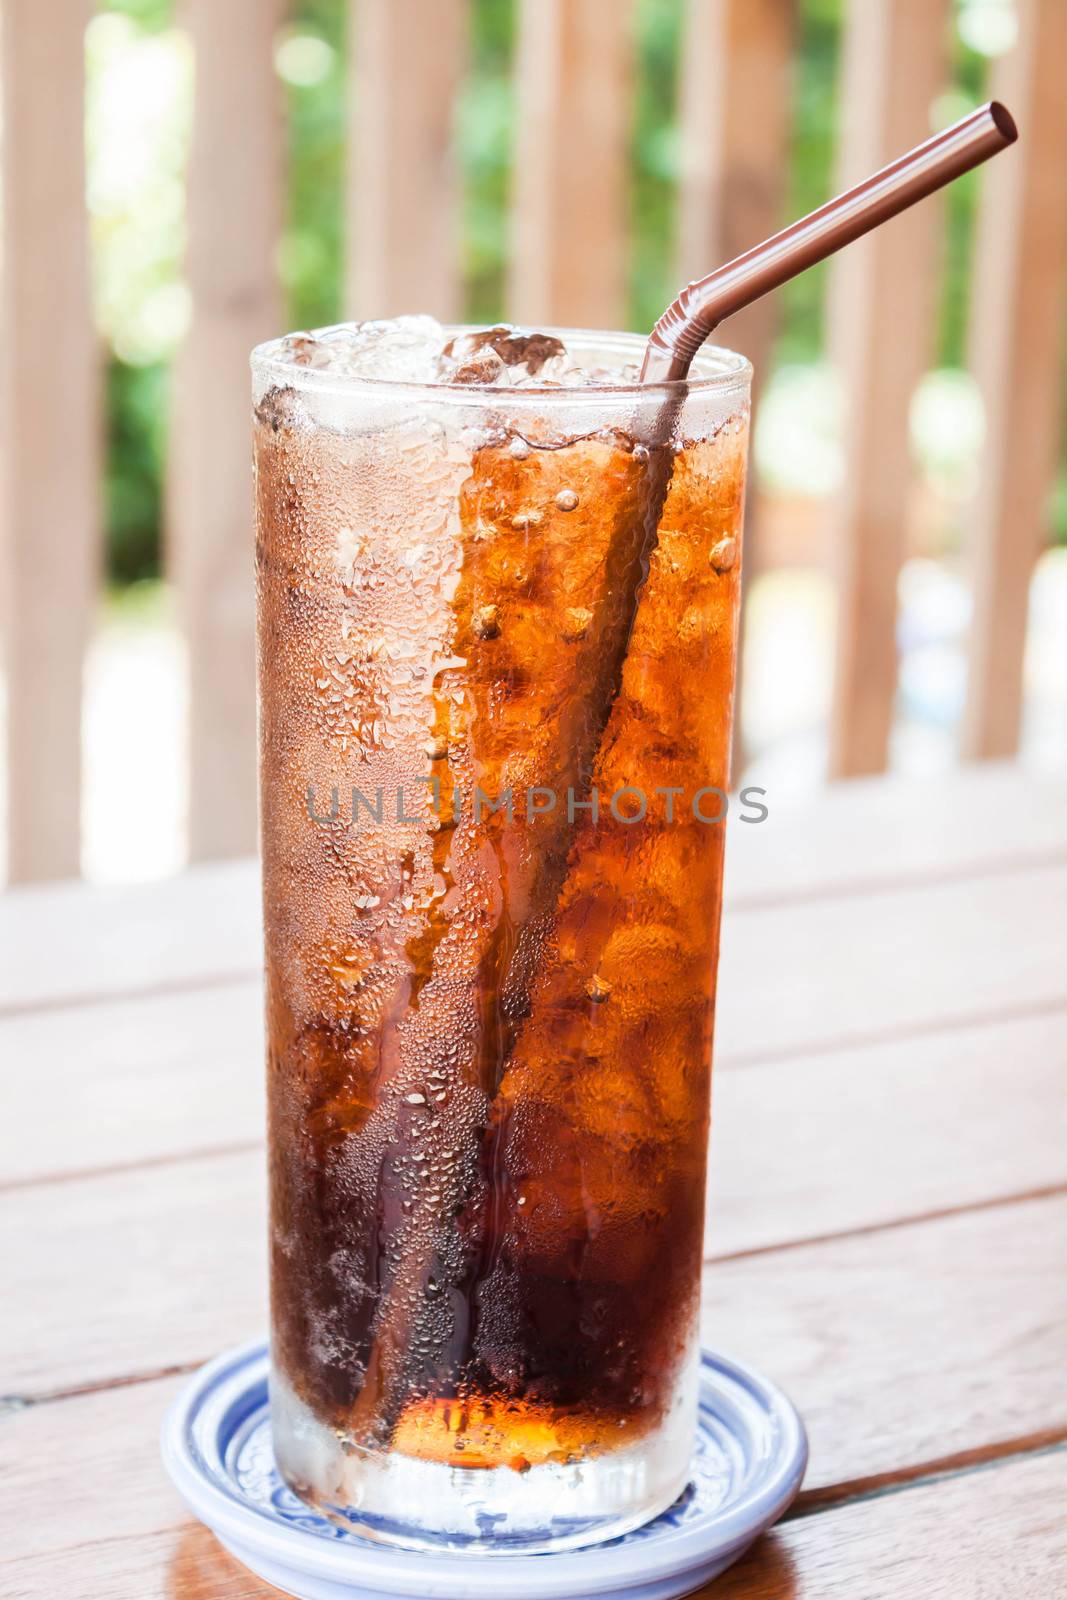 A glass of fresh cola drink with ice